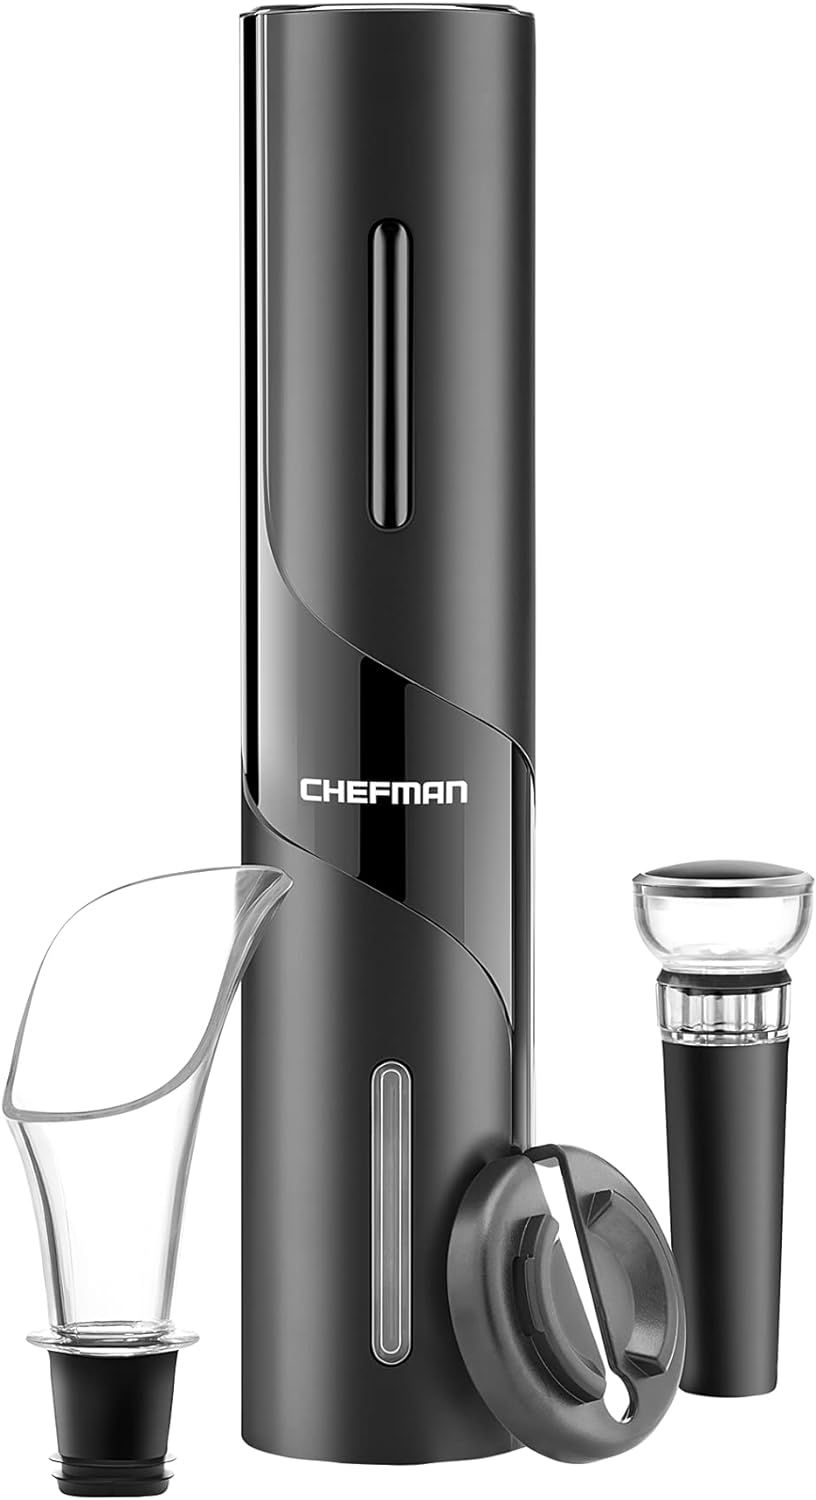 Chefman Electric Wine Opener Makes Opening Bottles Fast, Foolproof, And Fun! Black, Battery-Opera... | Amazon (US)